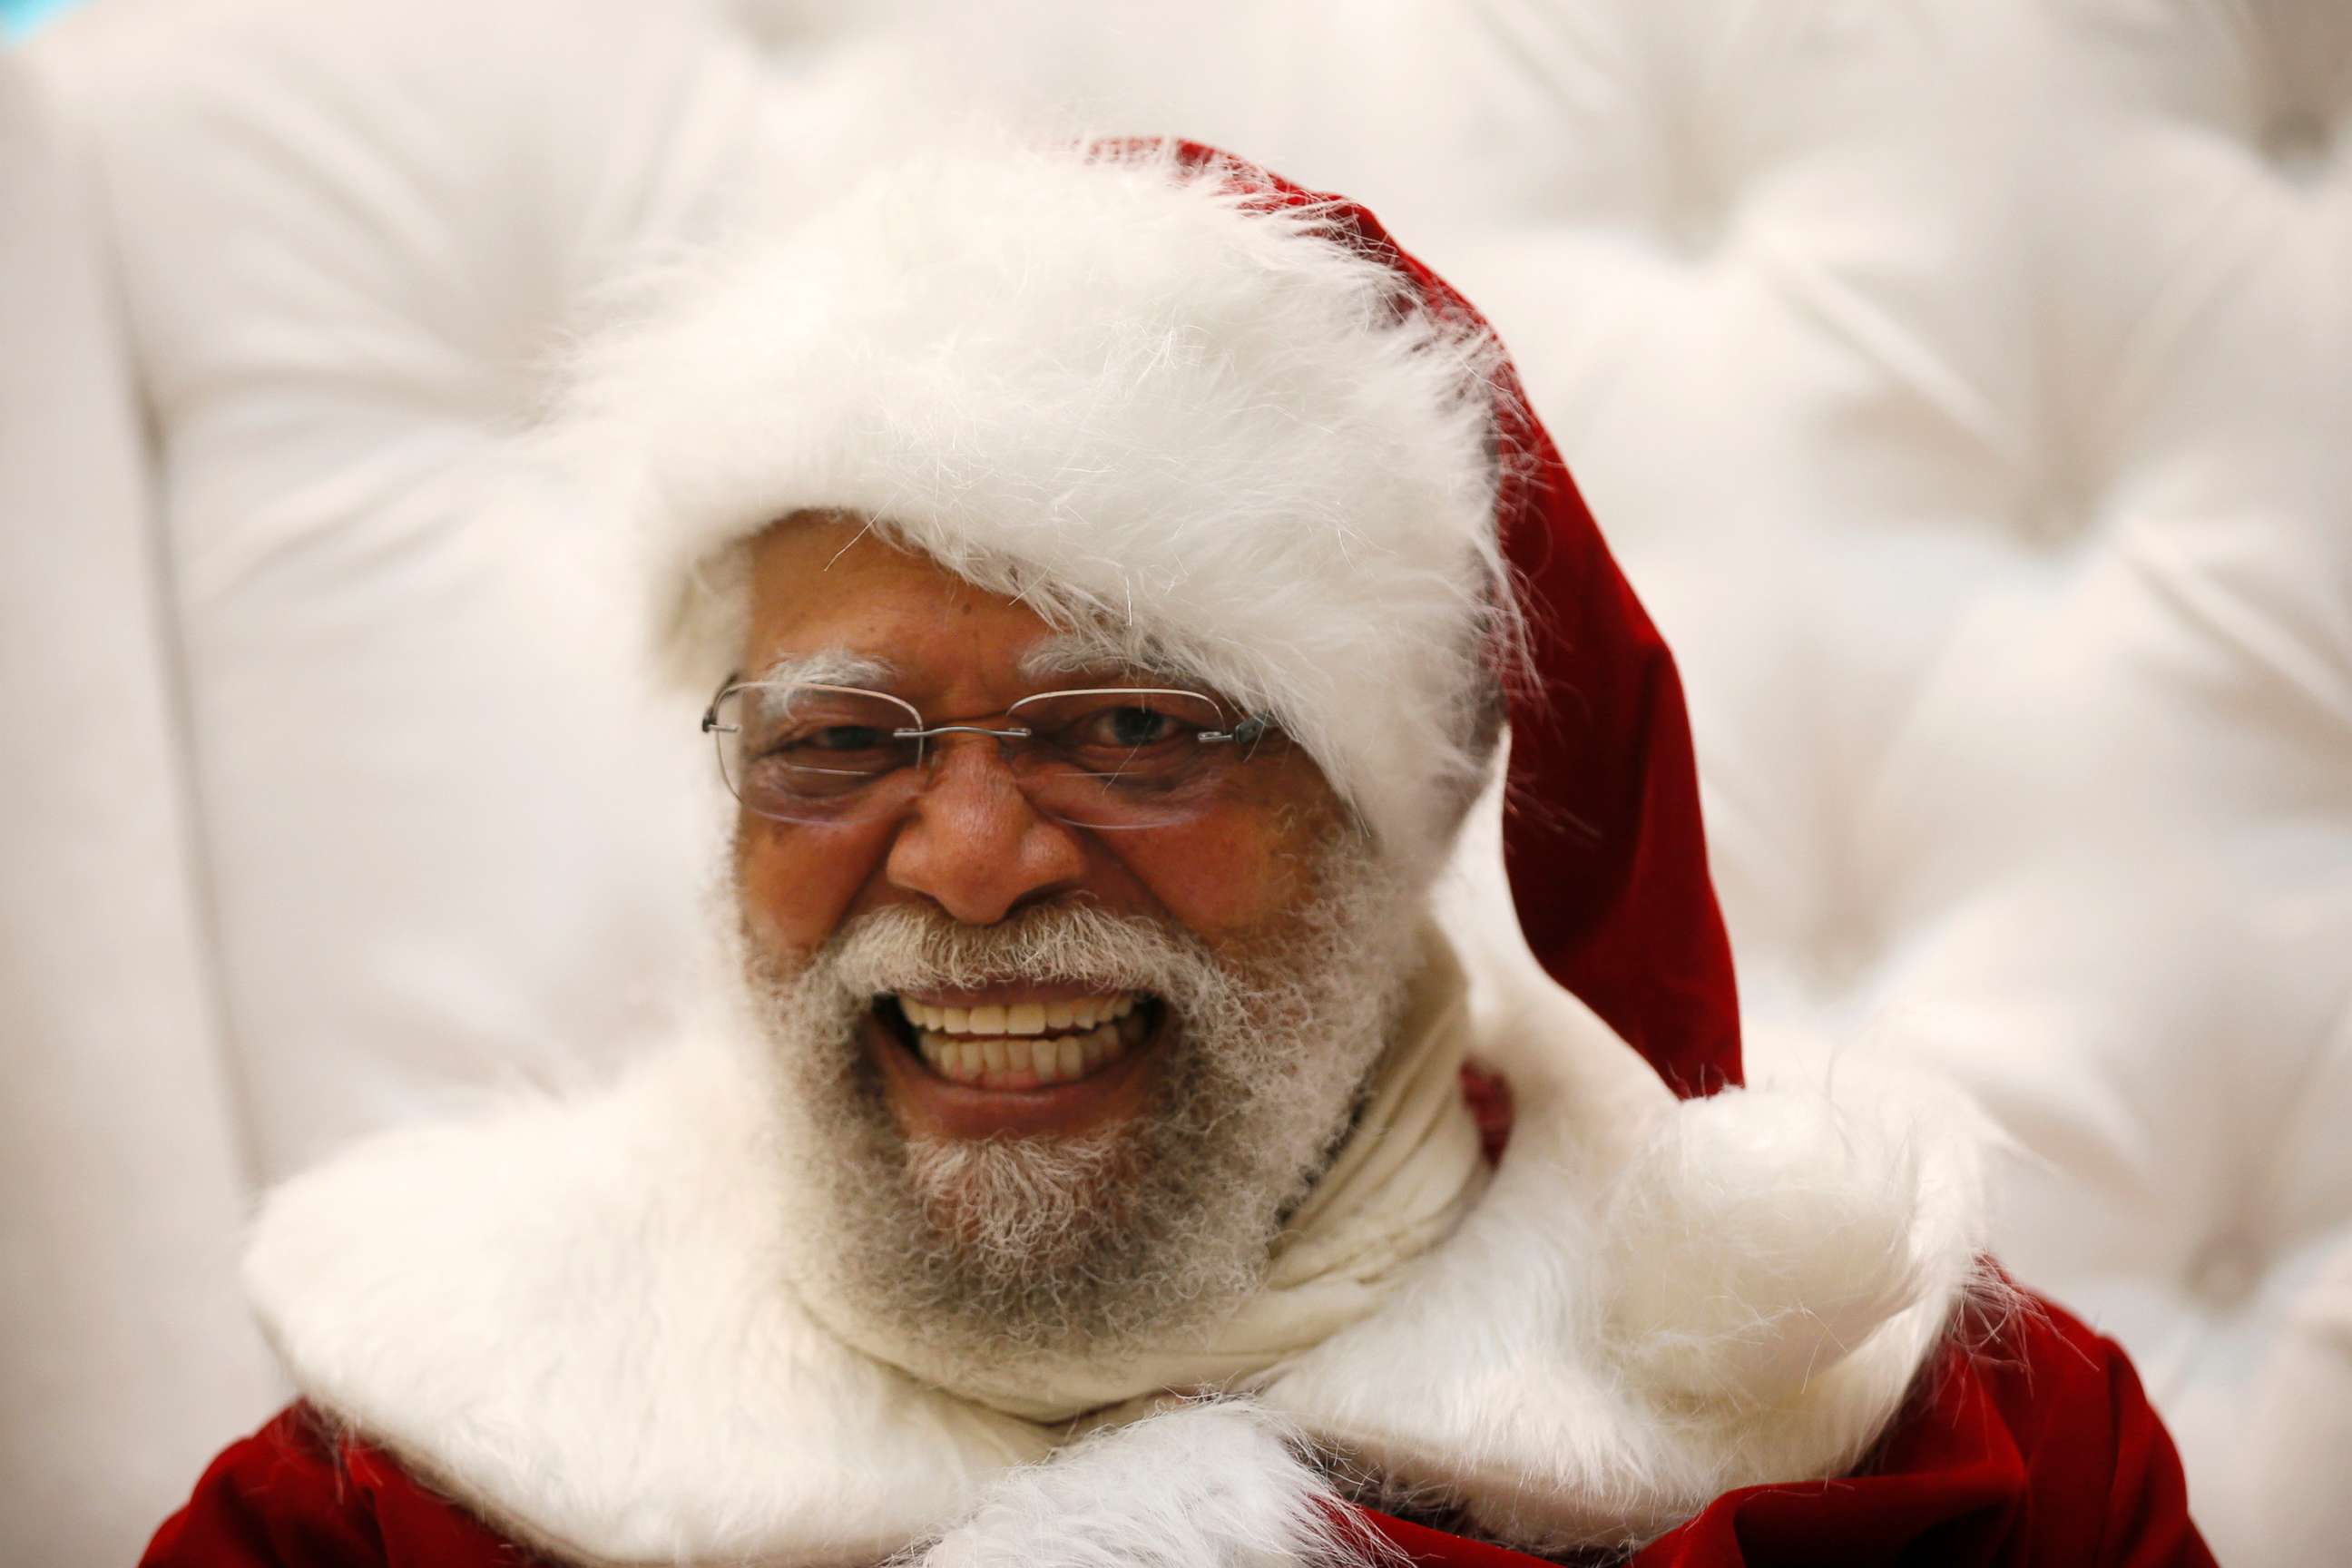 PHOTO: In this Dec. 16, 2013, file photo. Santa Claus Langston Patterson, 77, laughs as he greets children at Baldwin Hills Crenshaw Plaza mall in Los Angeles.